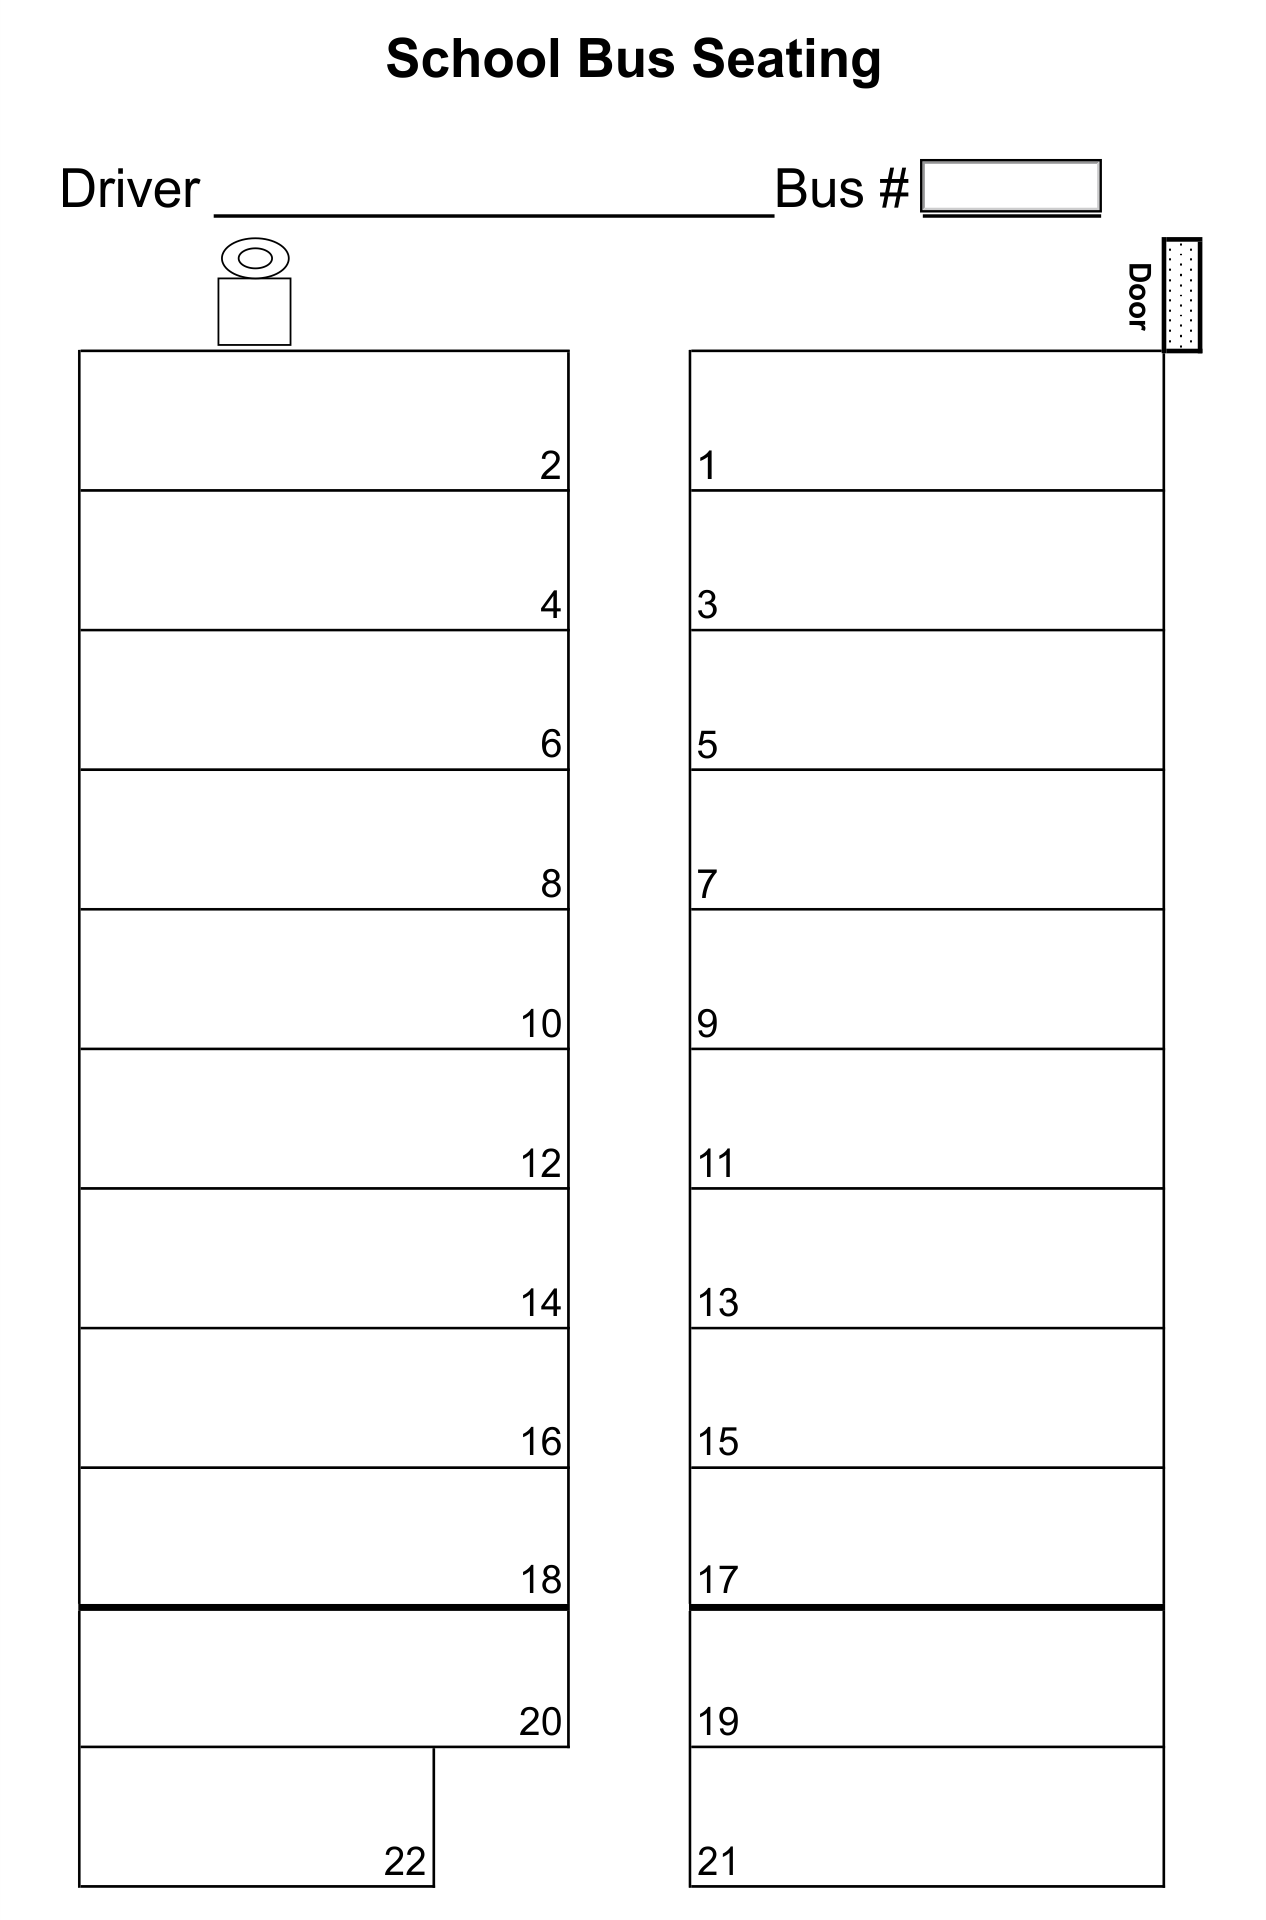 coach-bus-seating-chart-template-best-picture-of-chart-anyimage-org